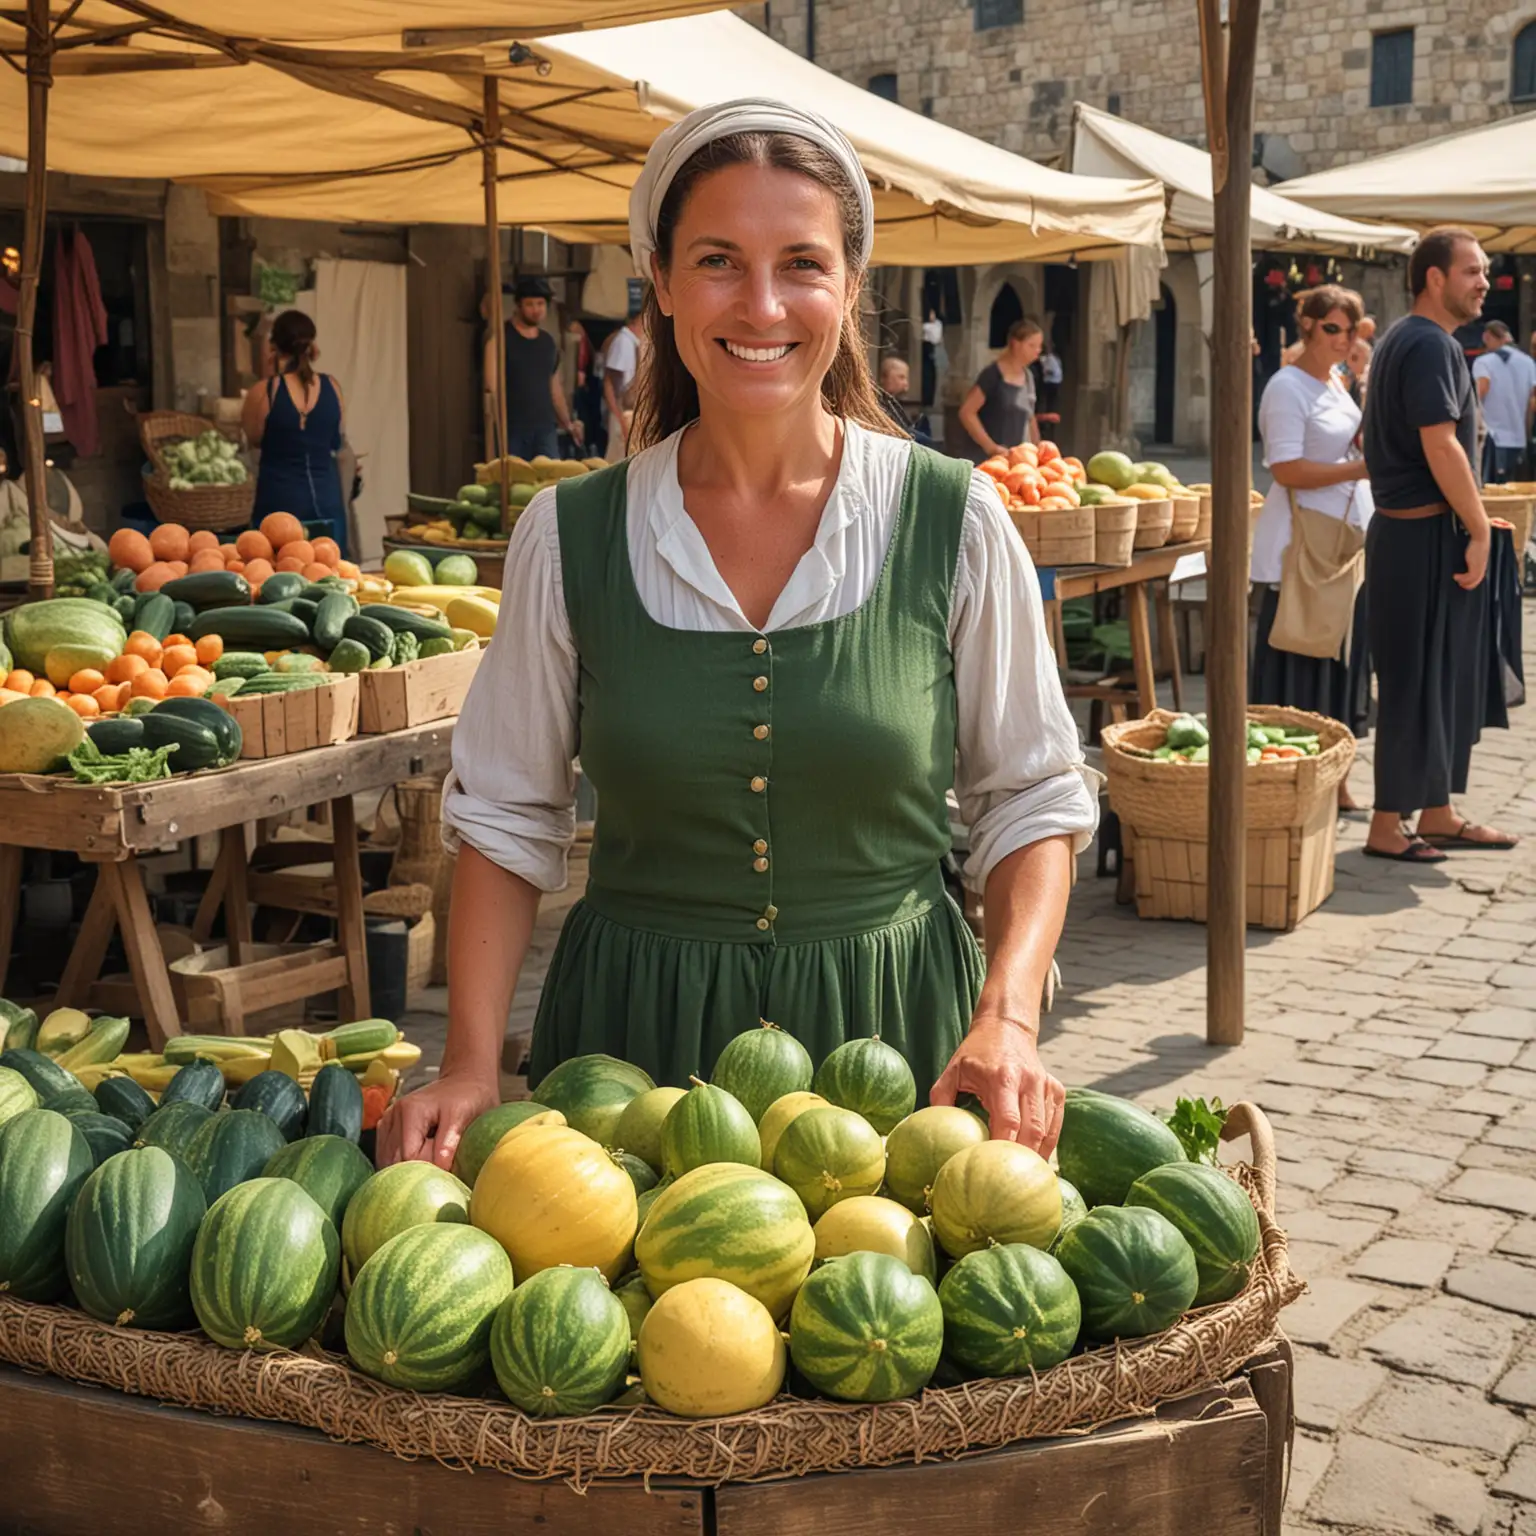 Medieval Market Vendor Selling Melons and Cucumbers